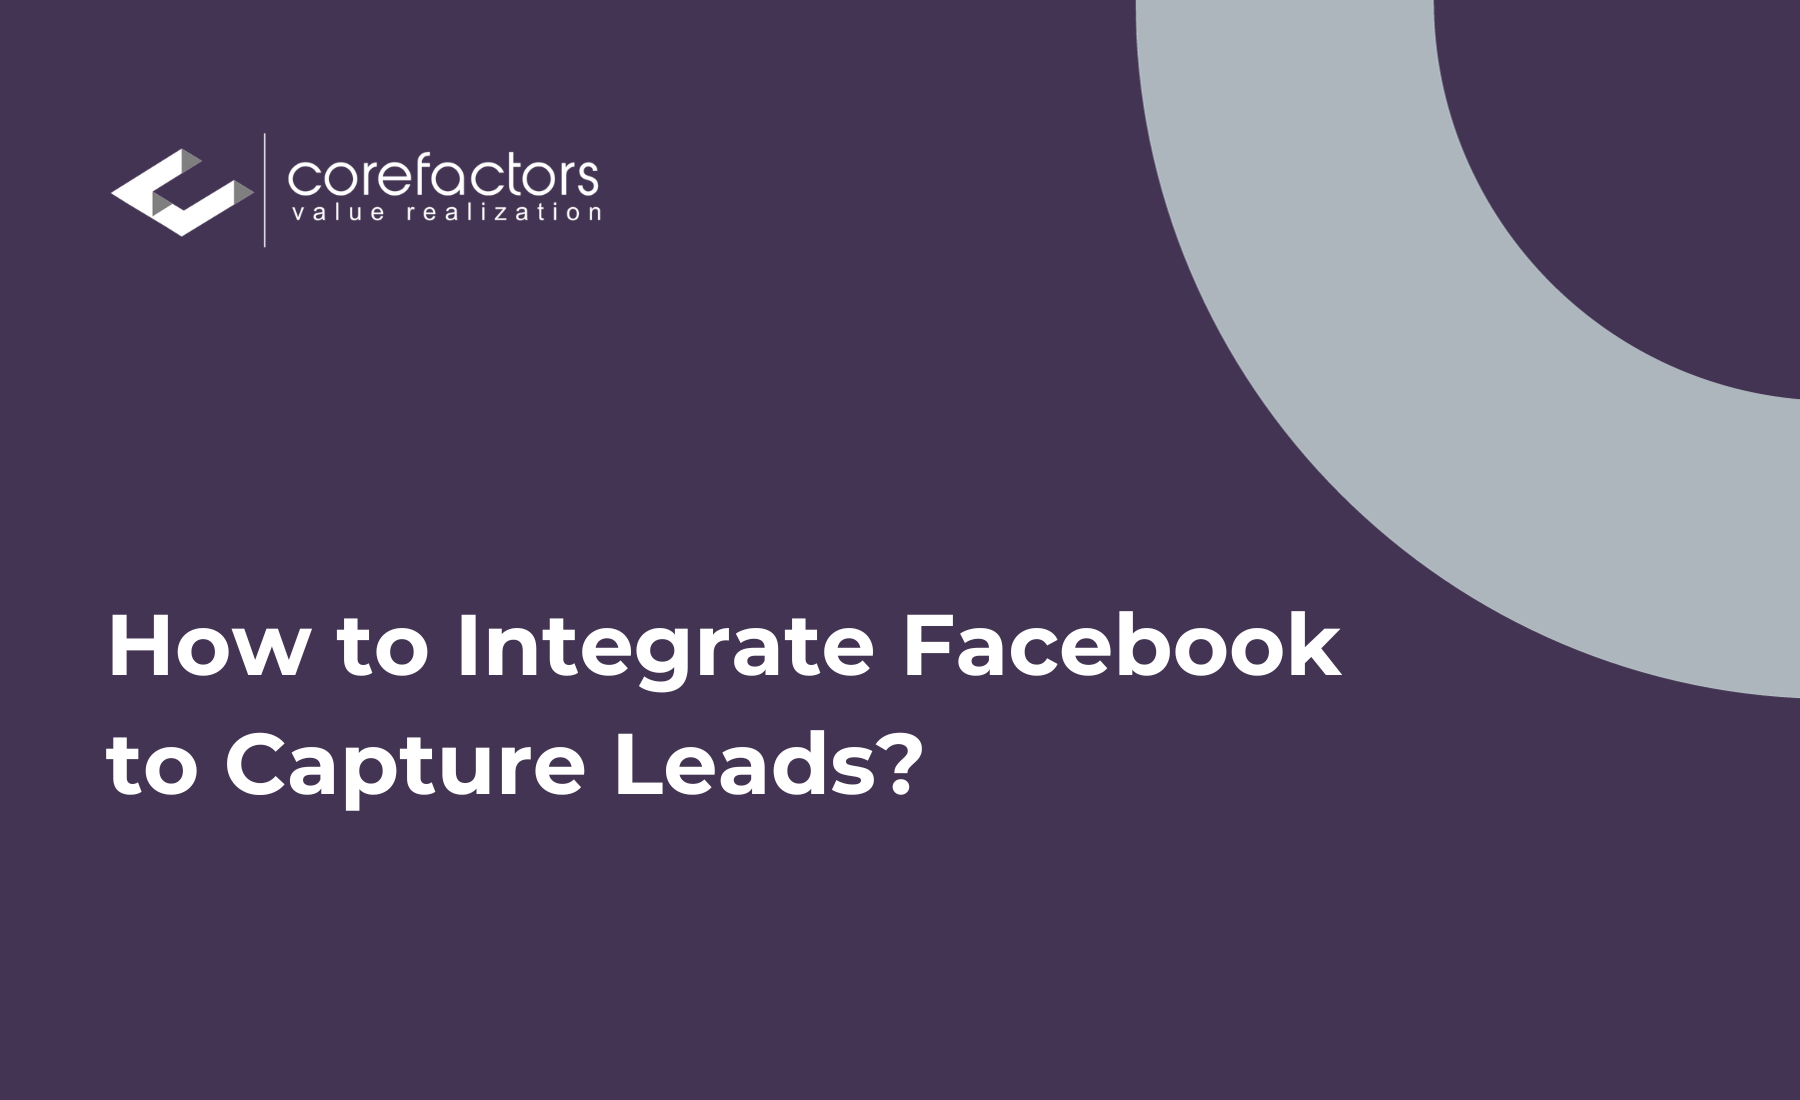 How to integrate your Facebook account with the CRM to capture leads?